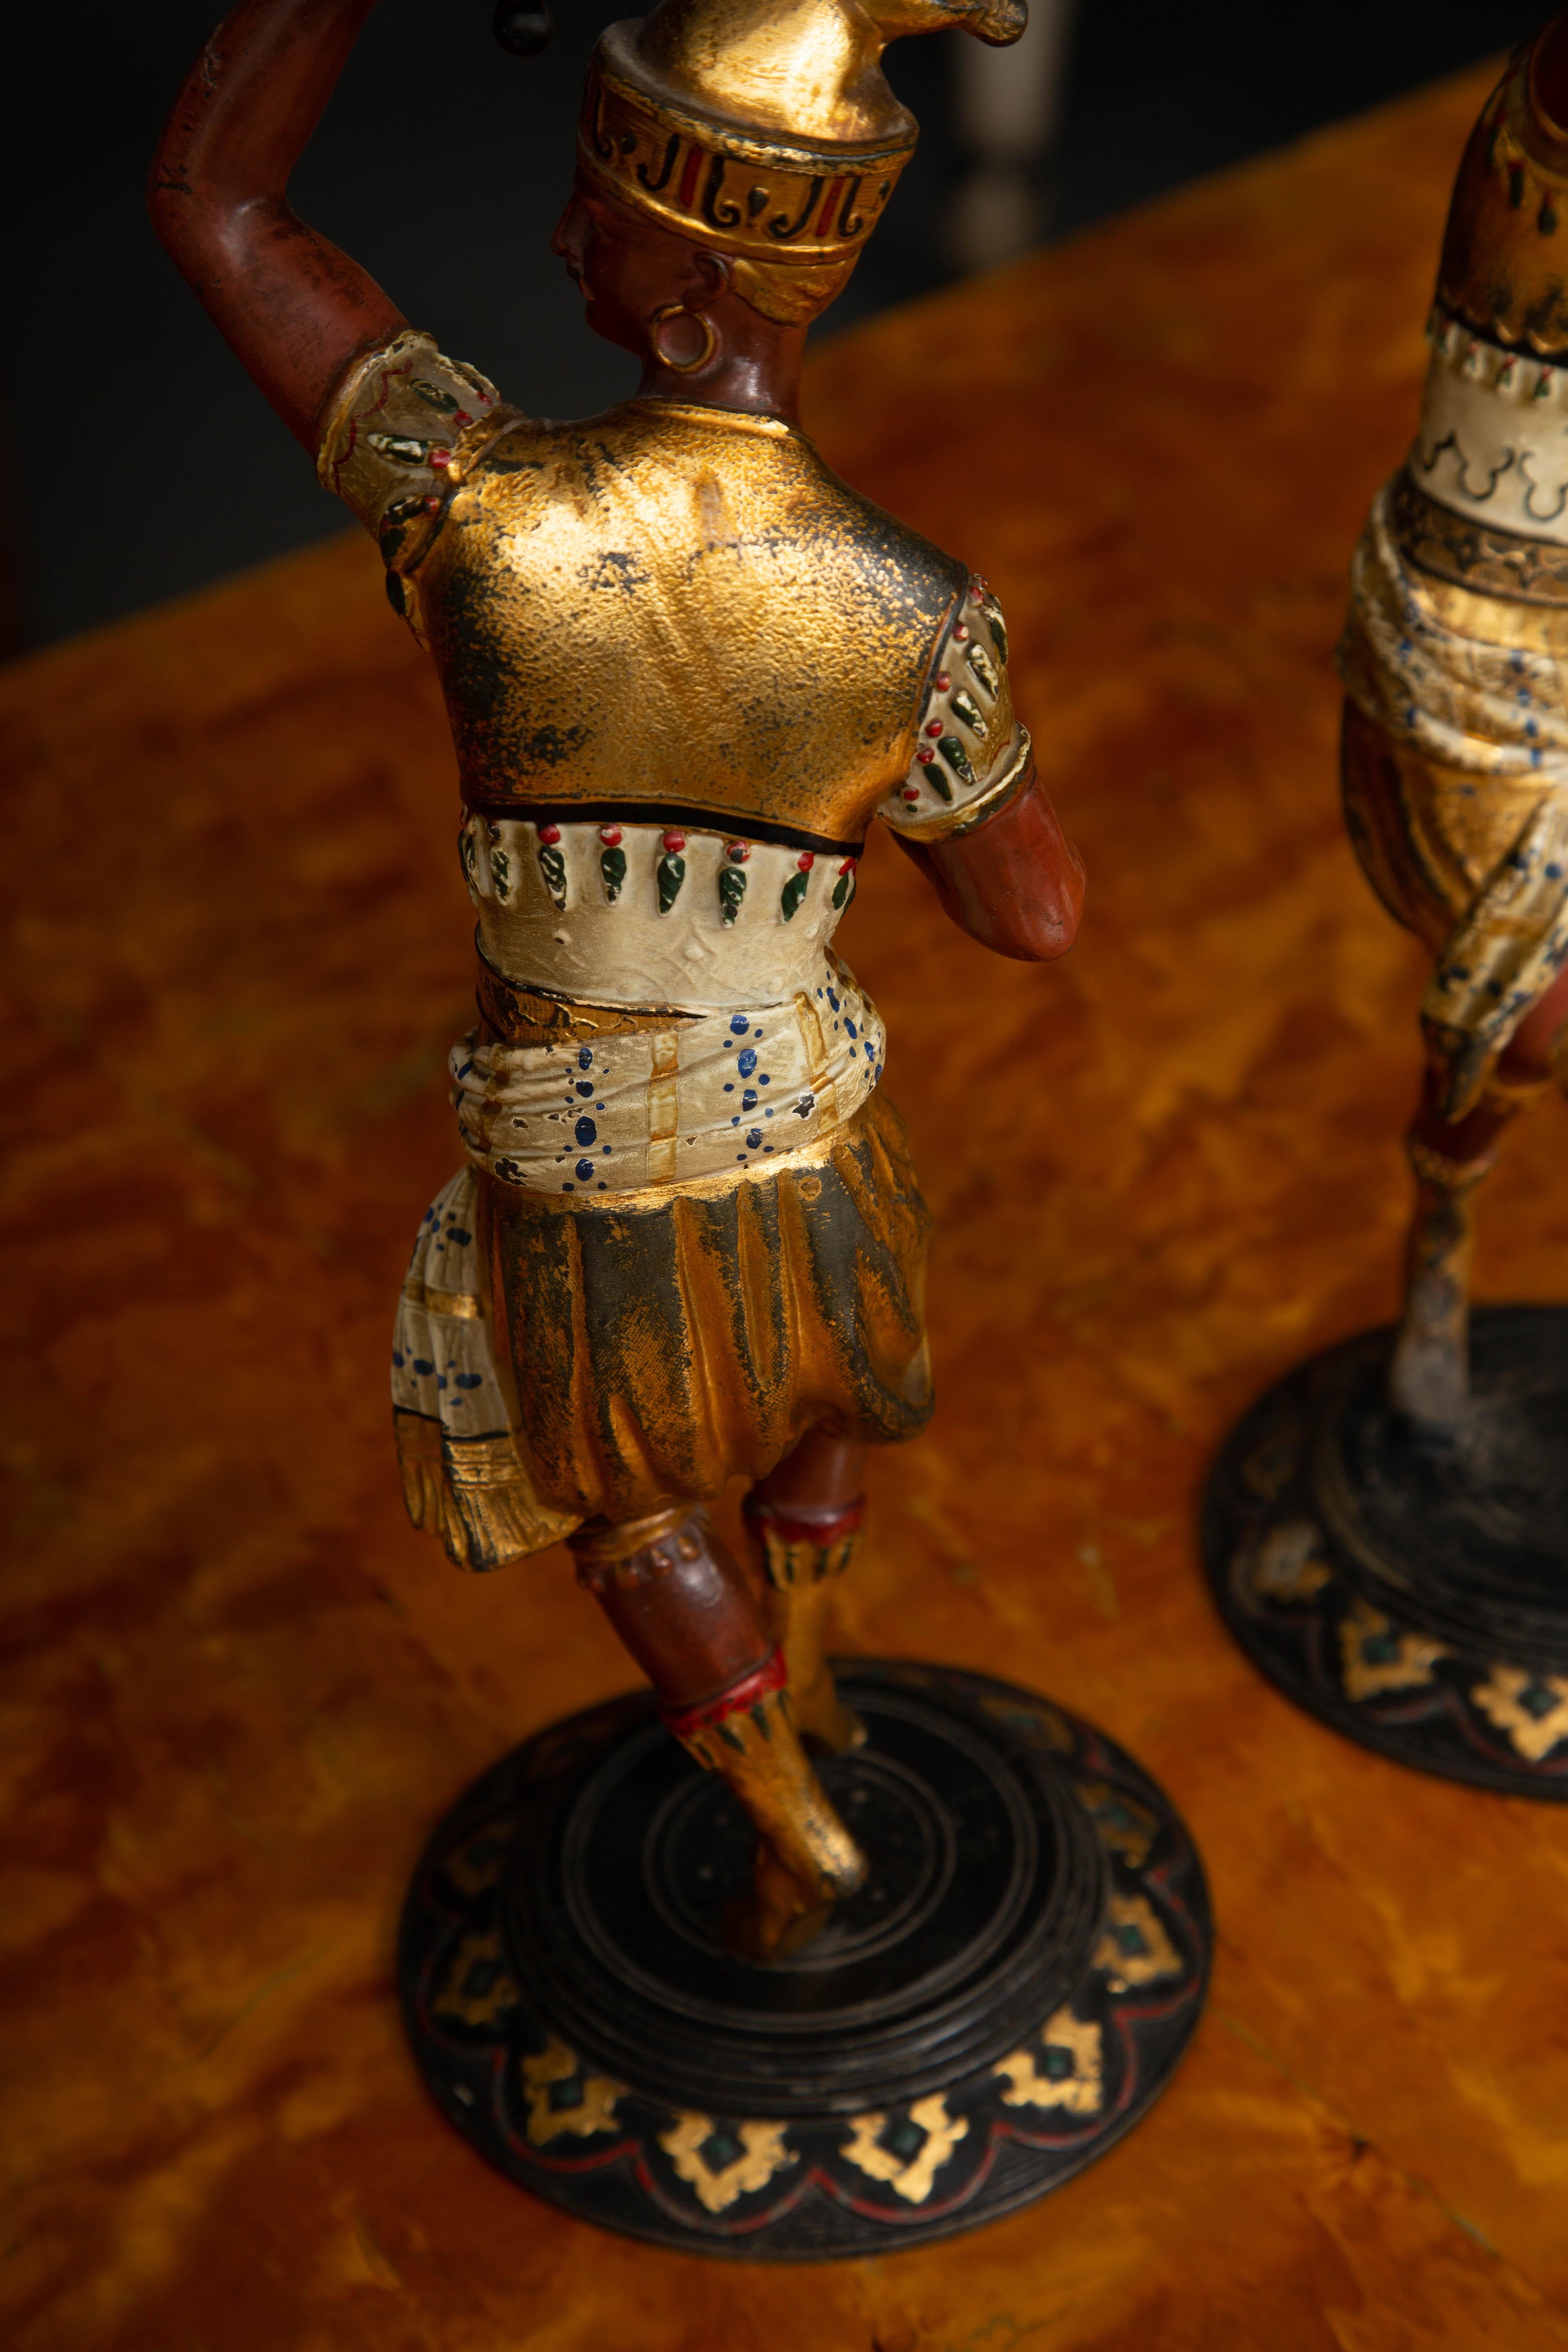 These are an interesting pair of Egyptian Revival Figures as candleholders. The figures are painted and offer an aged patina, mid-20th century.